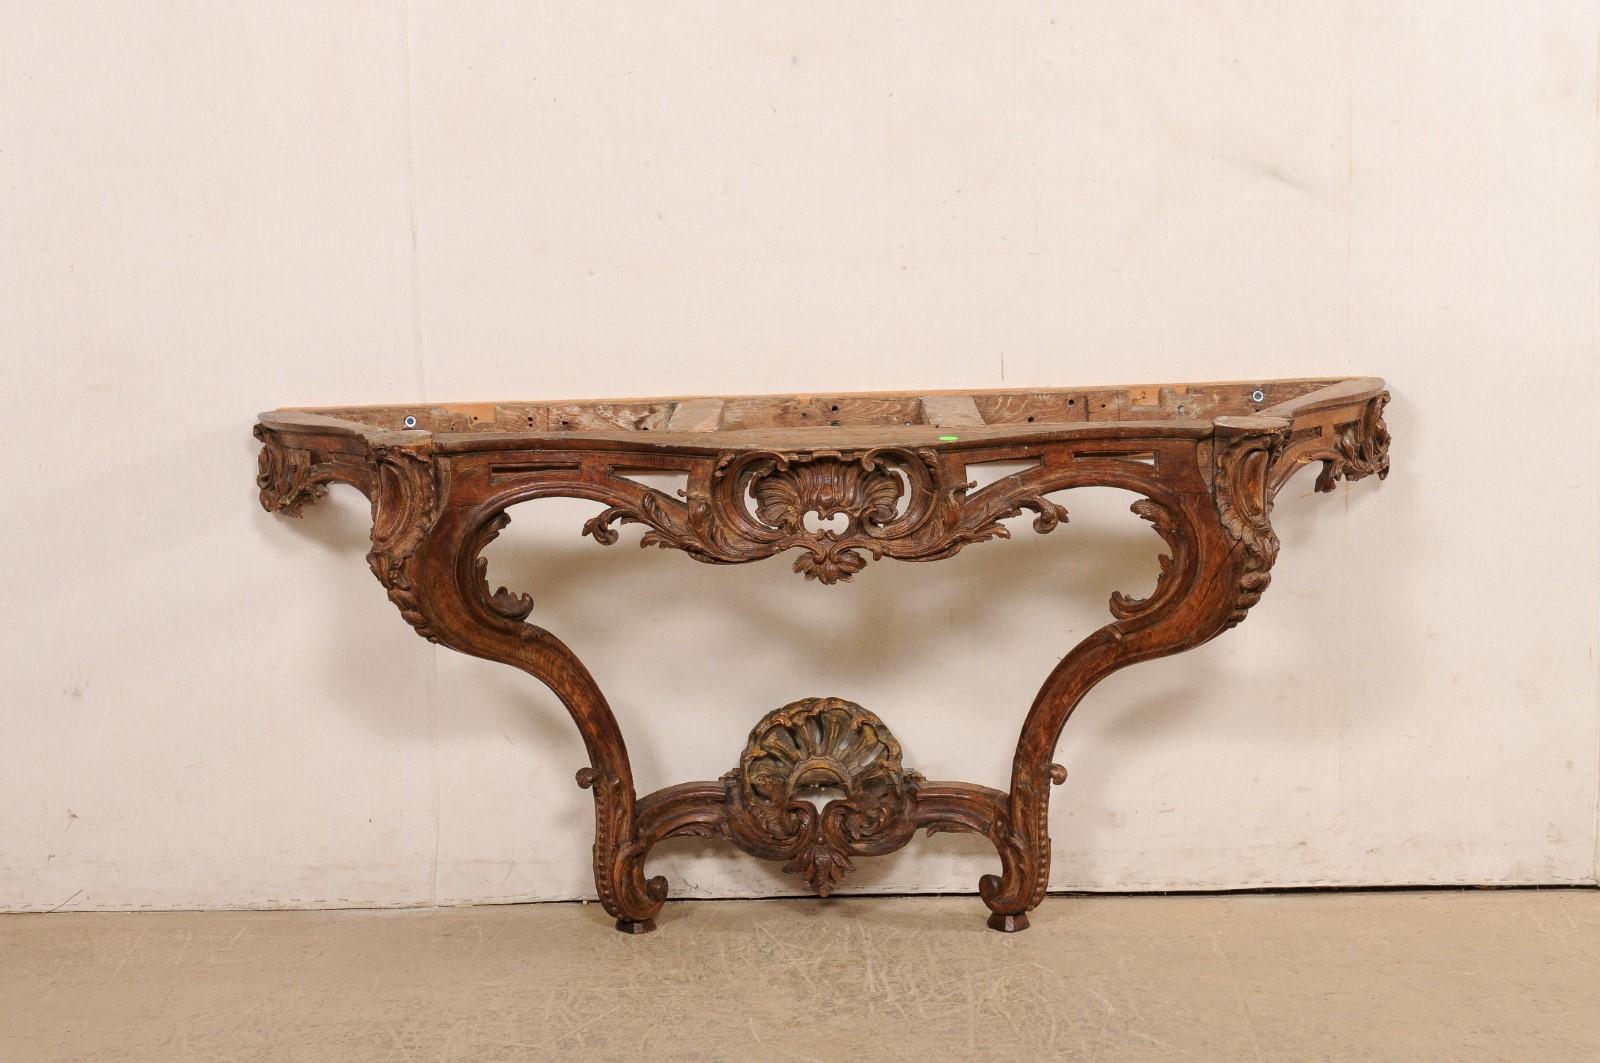 An Exquisite 18th C. French Rococo Serpentine Wall Console w/Marble Top For Sale 5